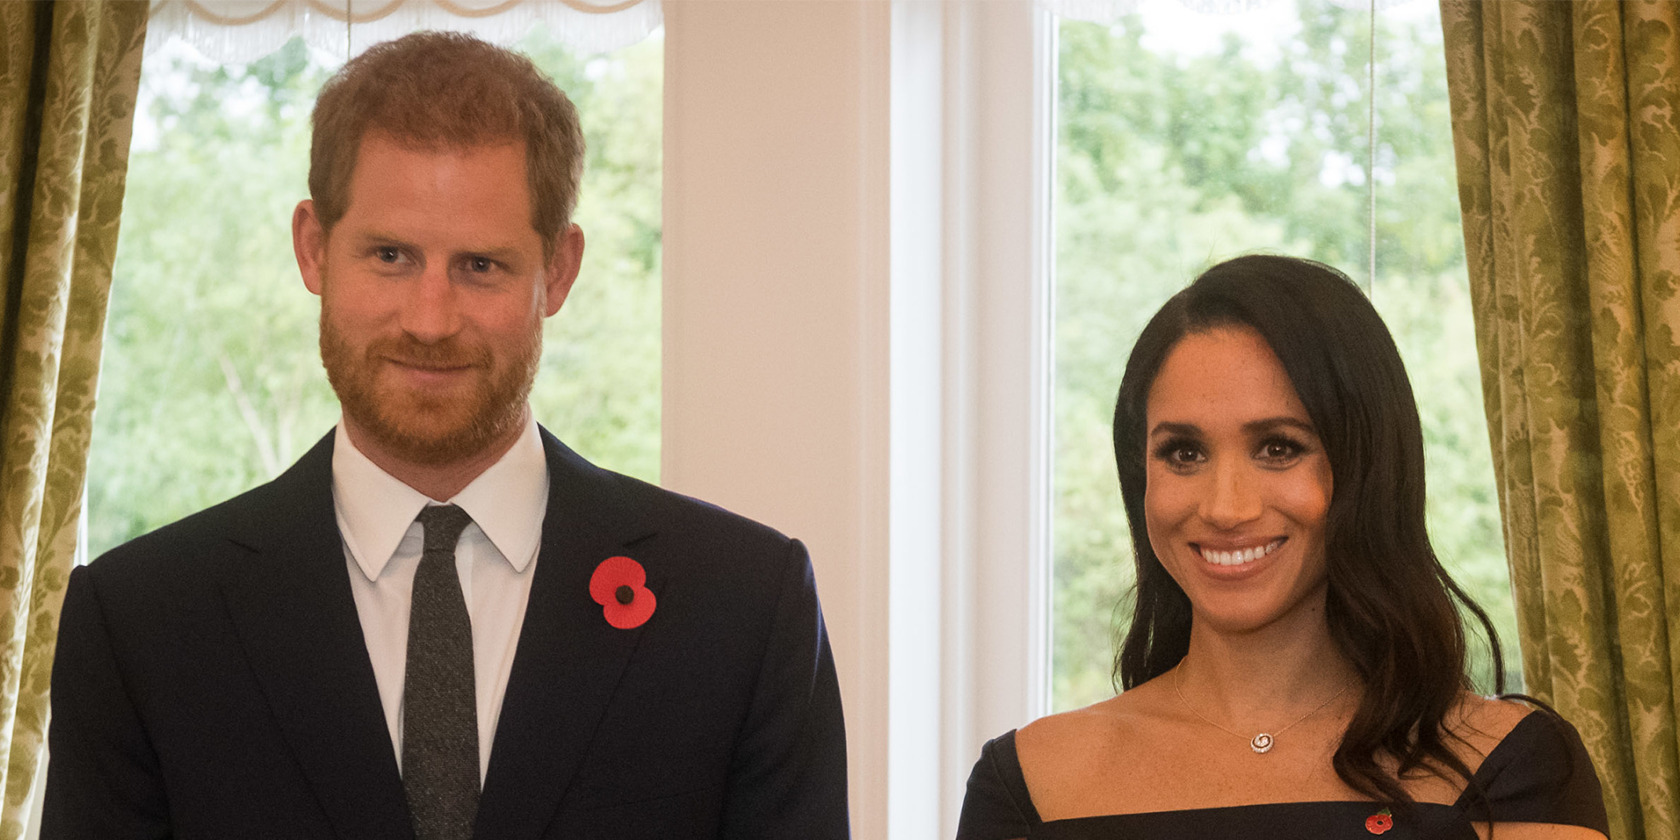 Prince Harry and Meghan Markle smile for a formal photo